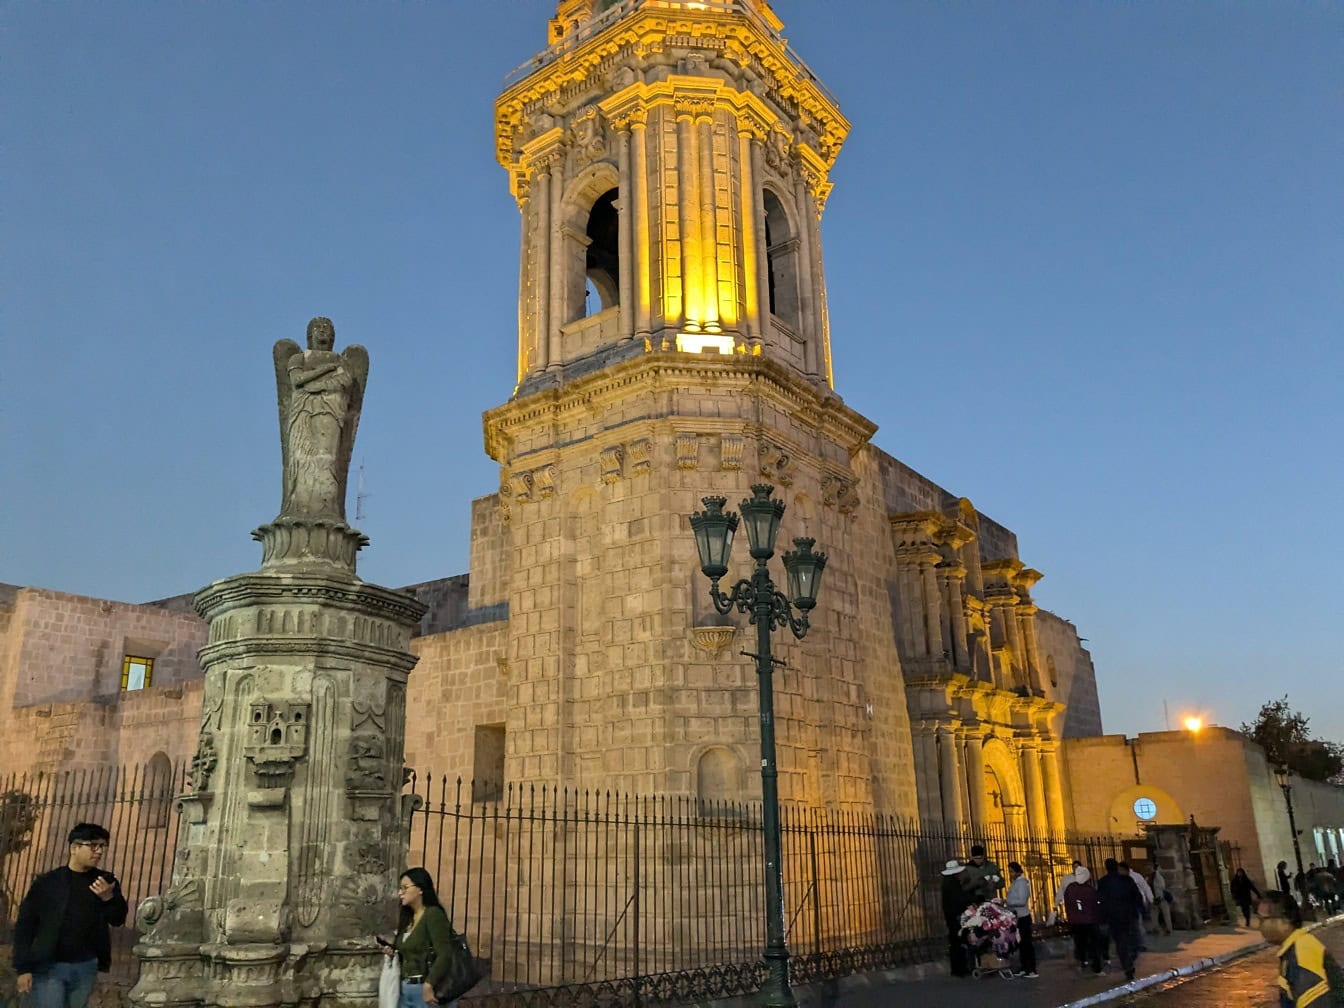 Main bell tower of the Santo Domingo church in the city of Arequipa in Peru in the evening